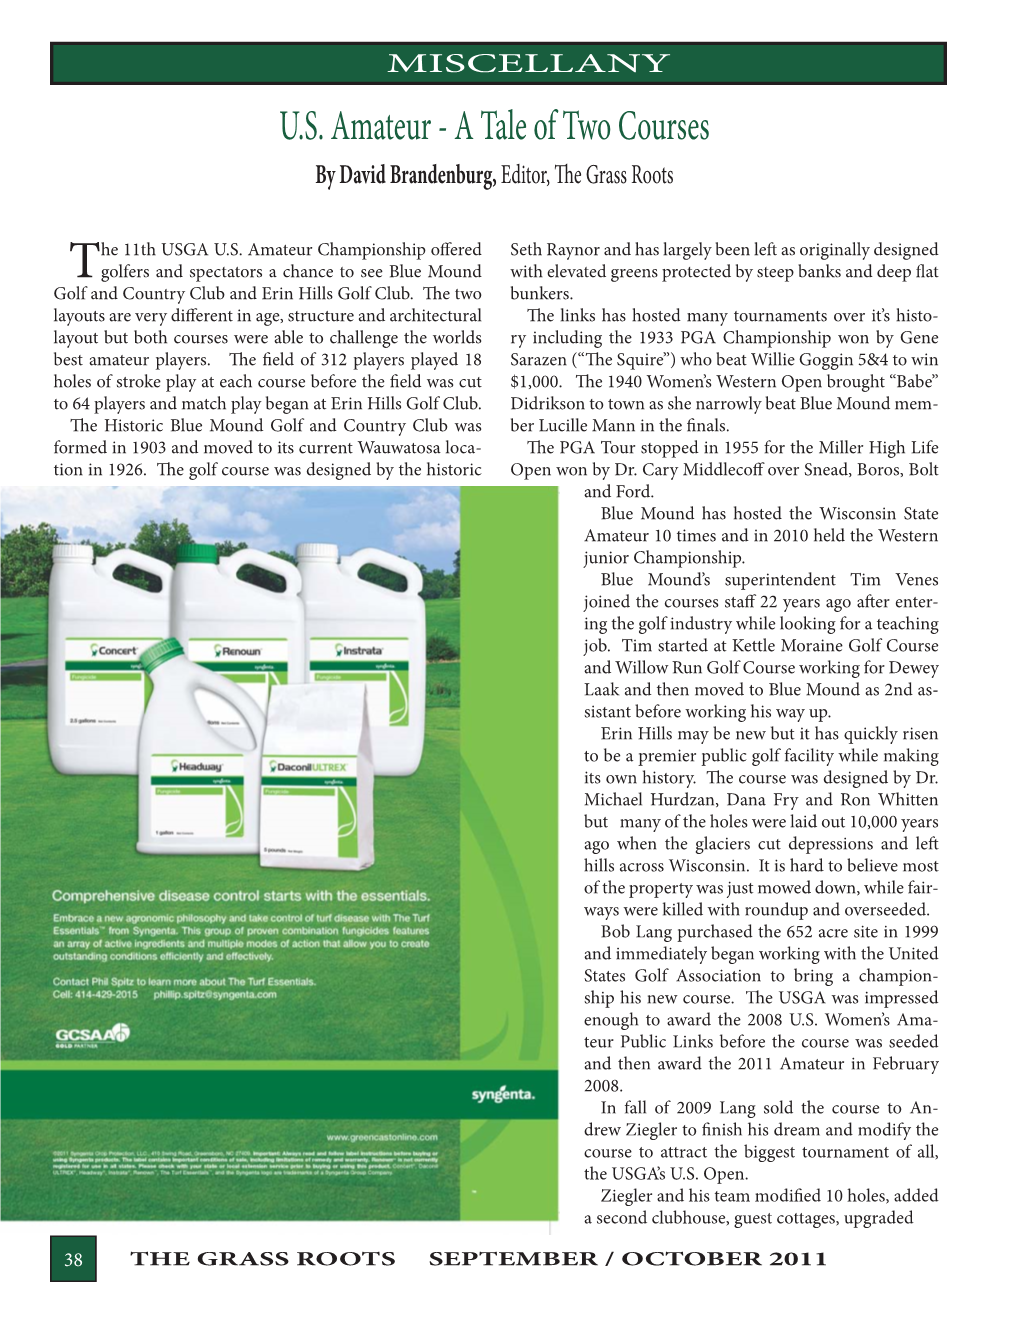 U.S. Amateur - a Tale of Two Courses by David Brandenburg, Editor, the Grass Roots